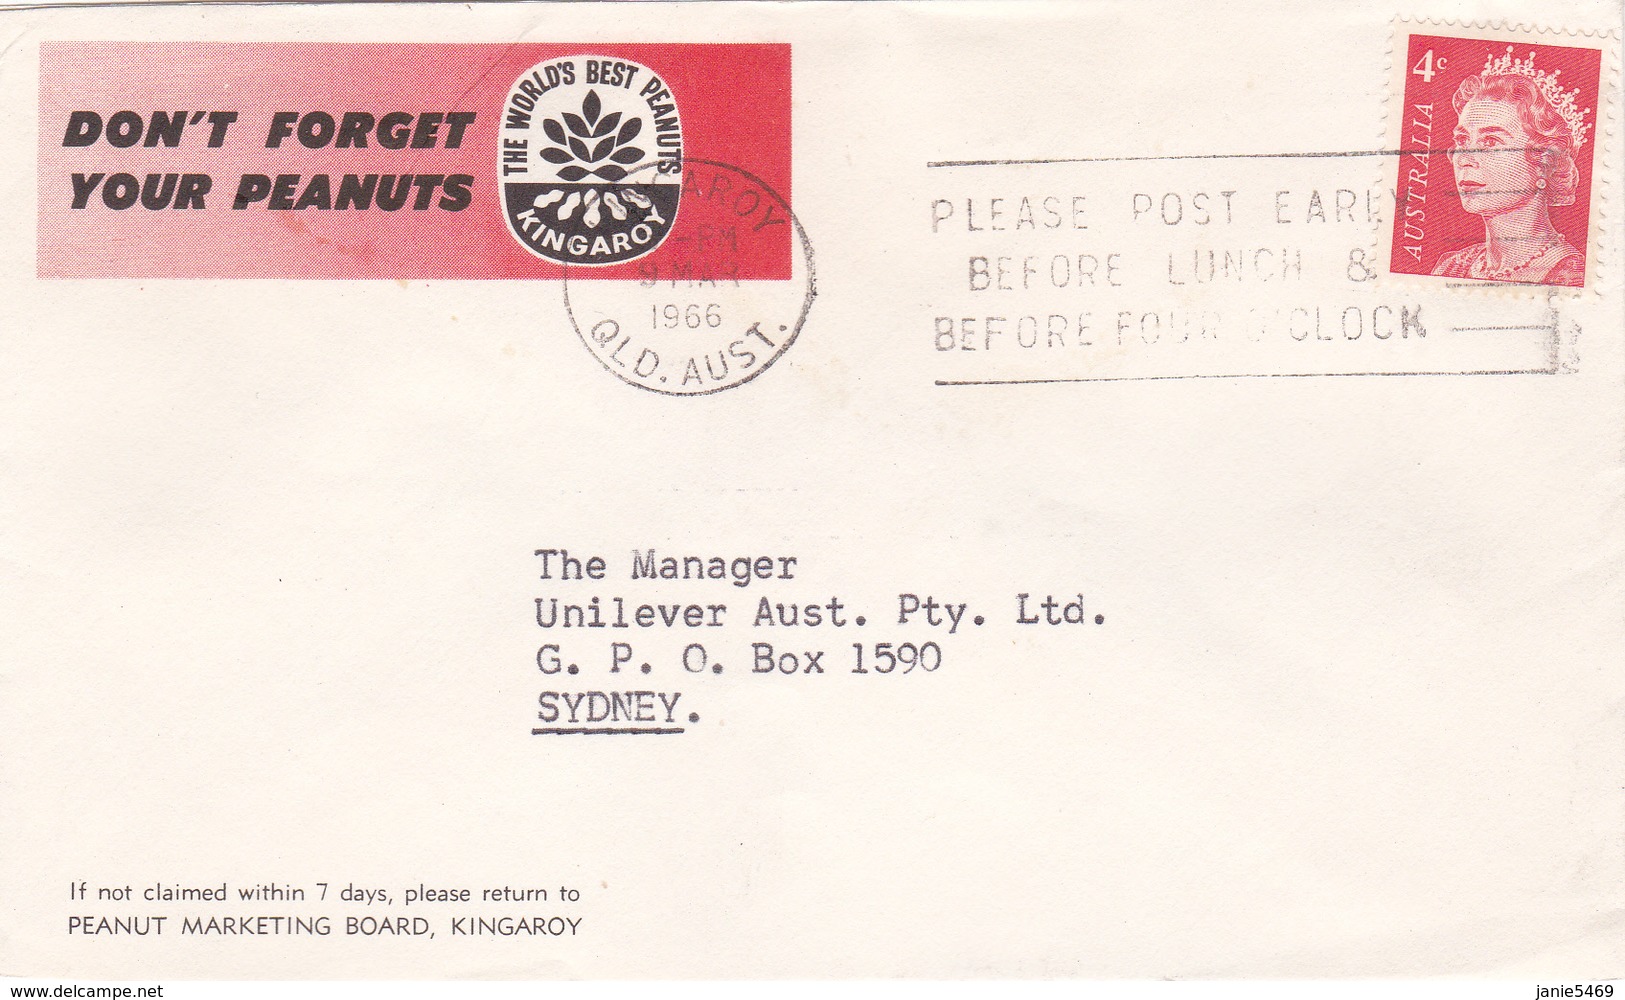 Australia 1966 Cover With PLEASE POST EARLY BEFORE LUNCH - Used Stamps